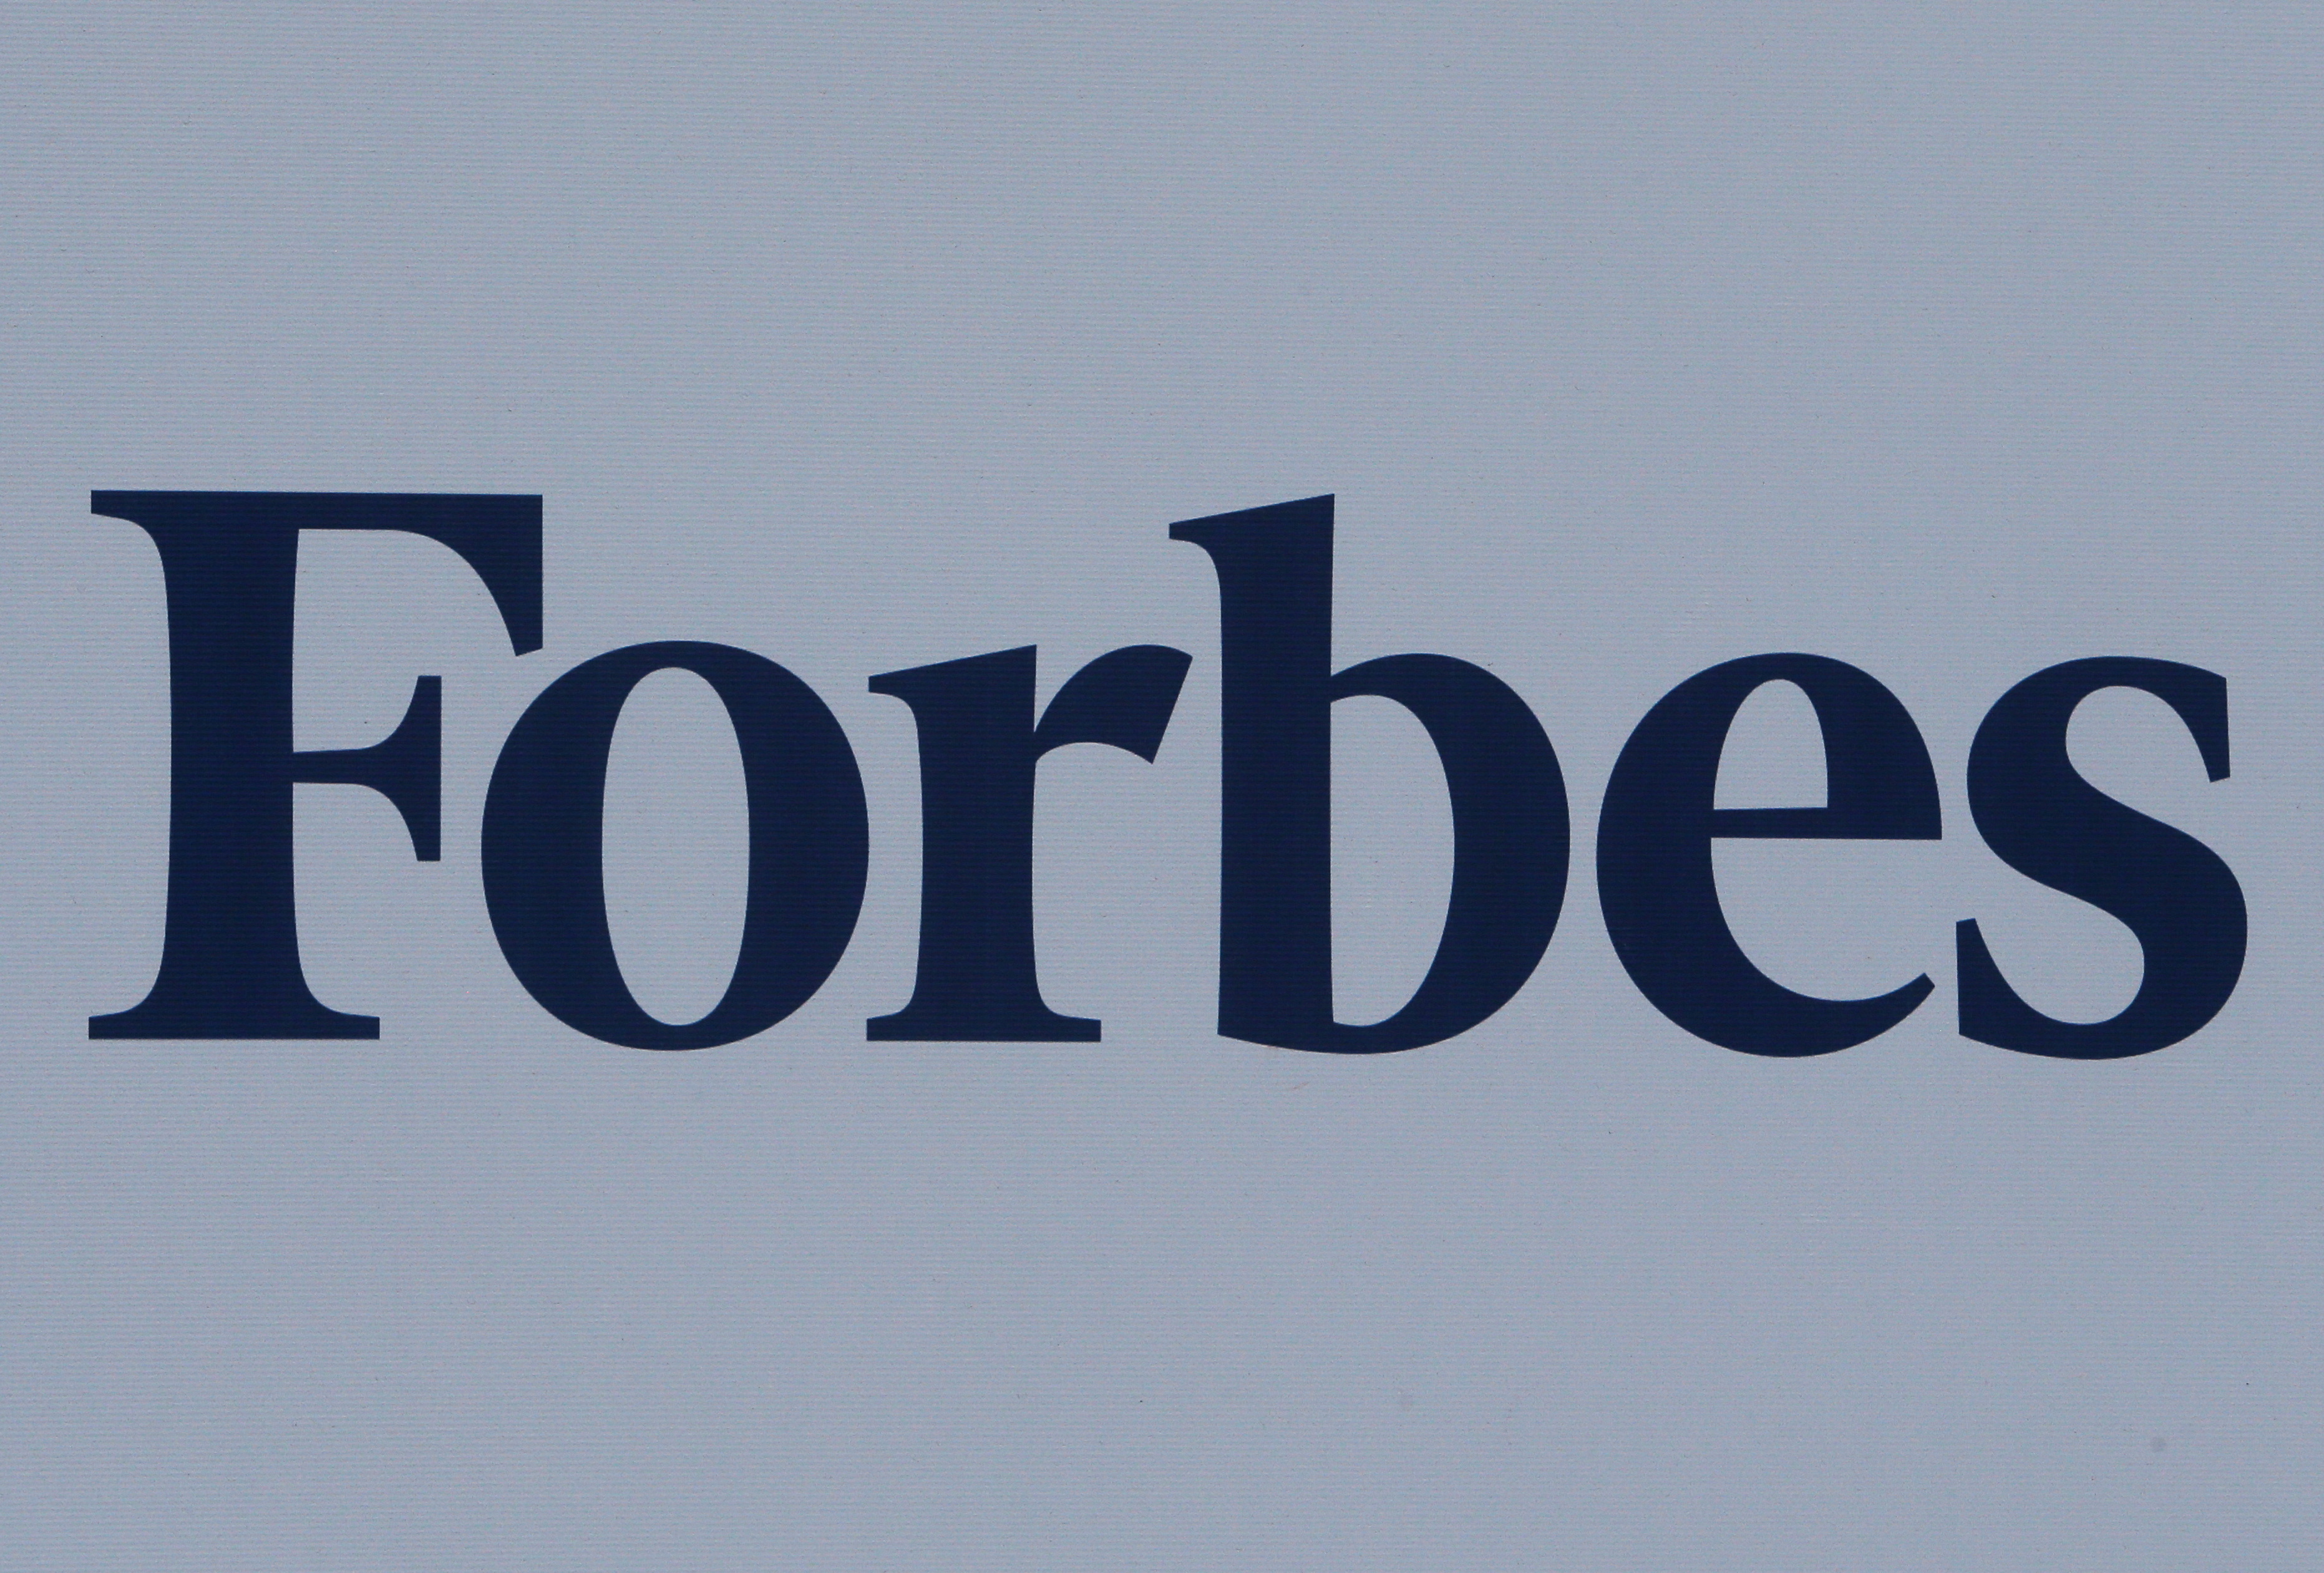 The logo of Forbes magazine is seen on a board in 2017